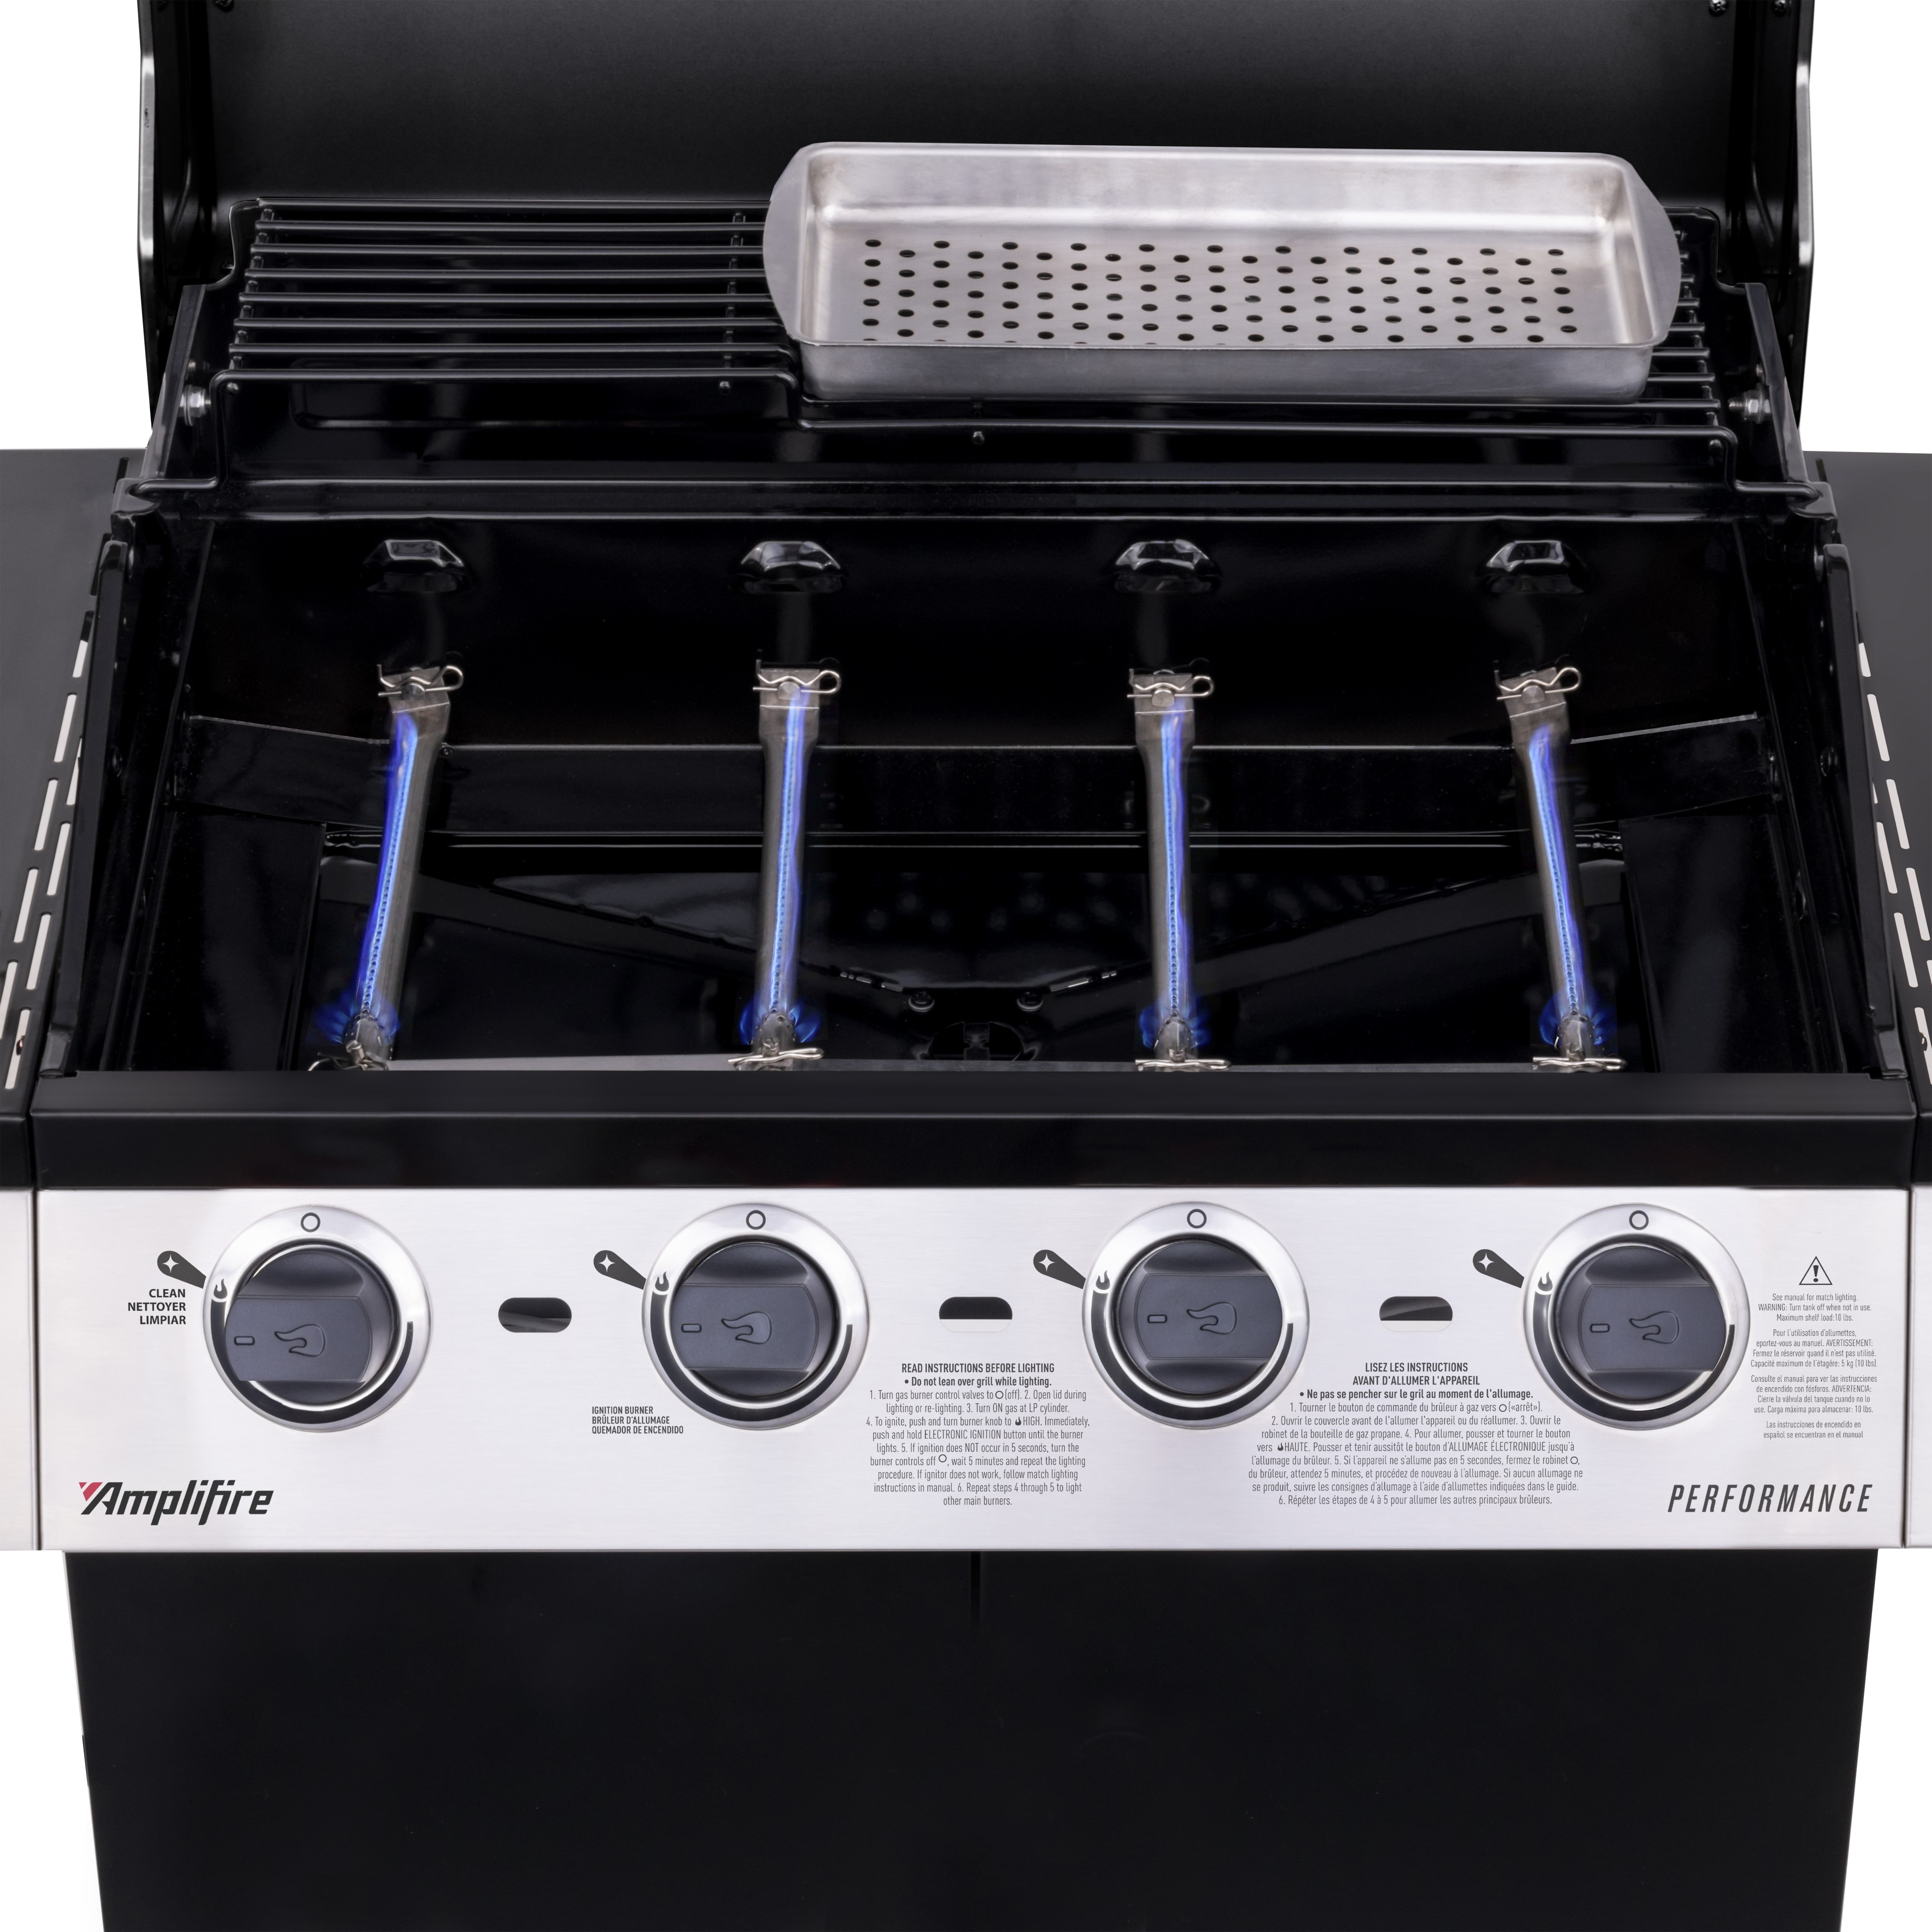 Char-Broil® Performance Series™ Amplifire 4-Burner Gas Grill